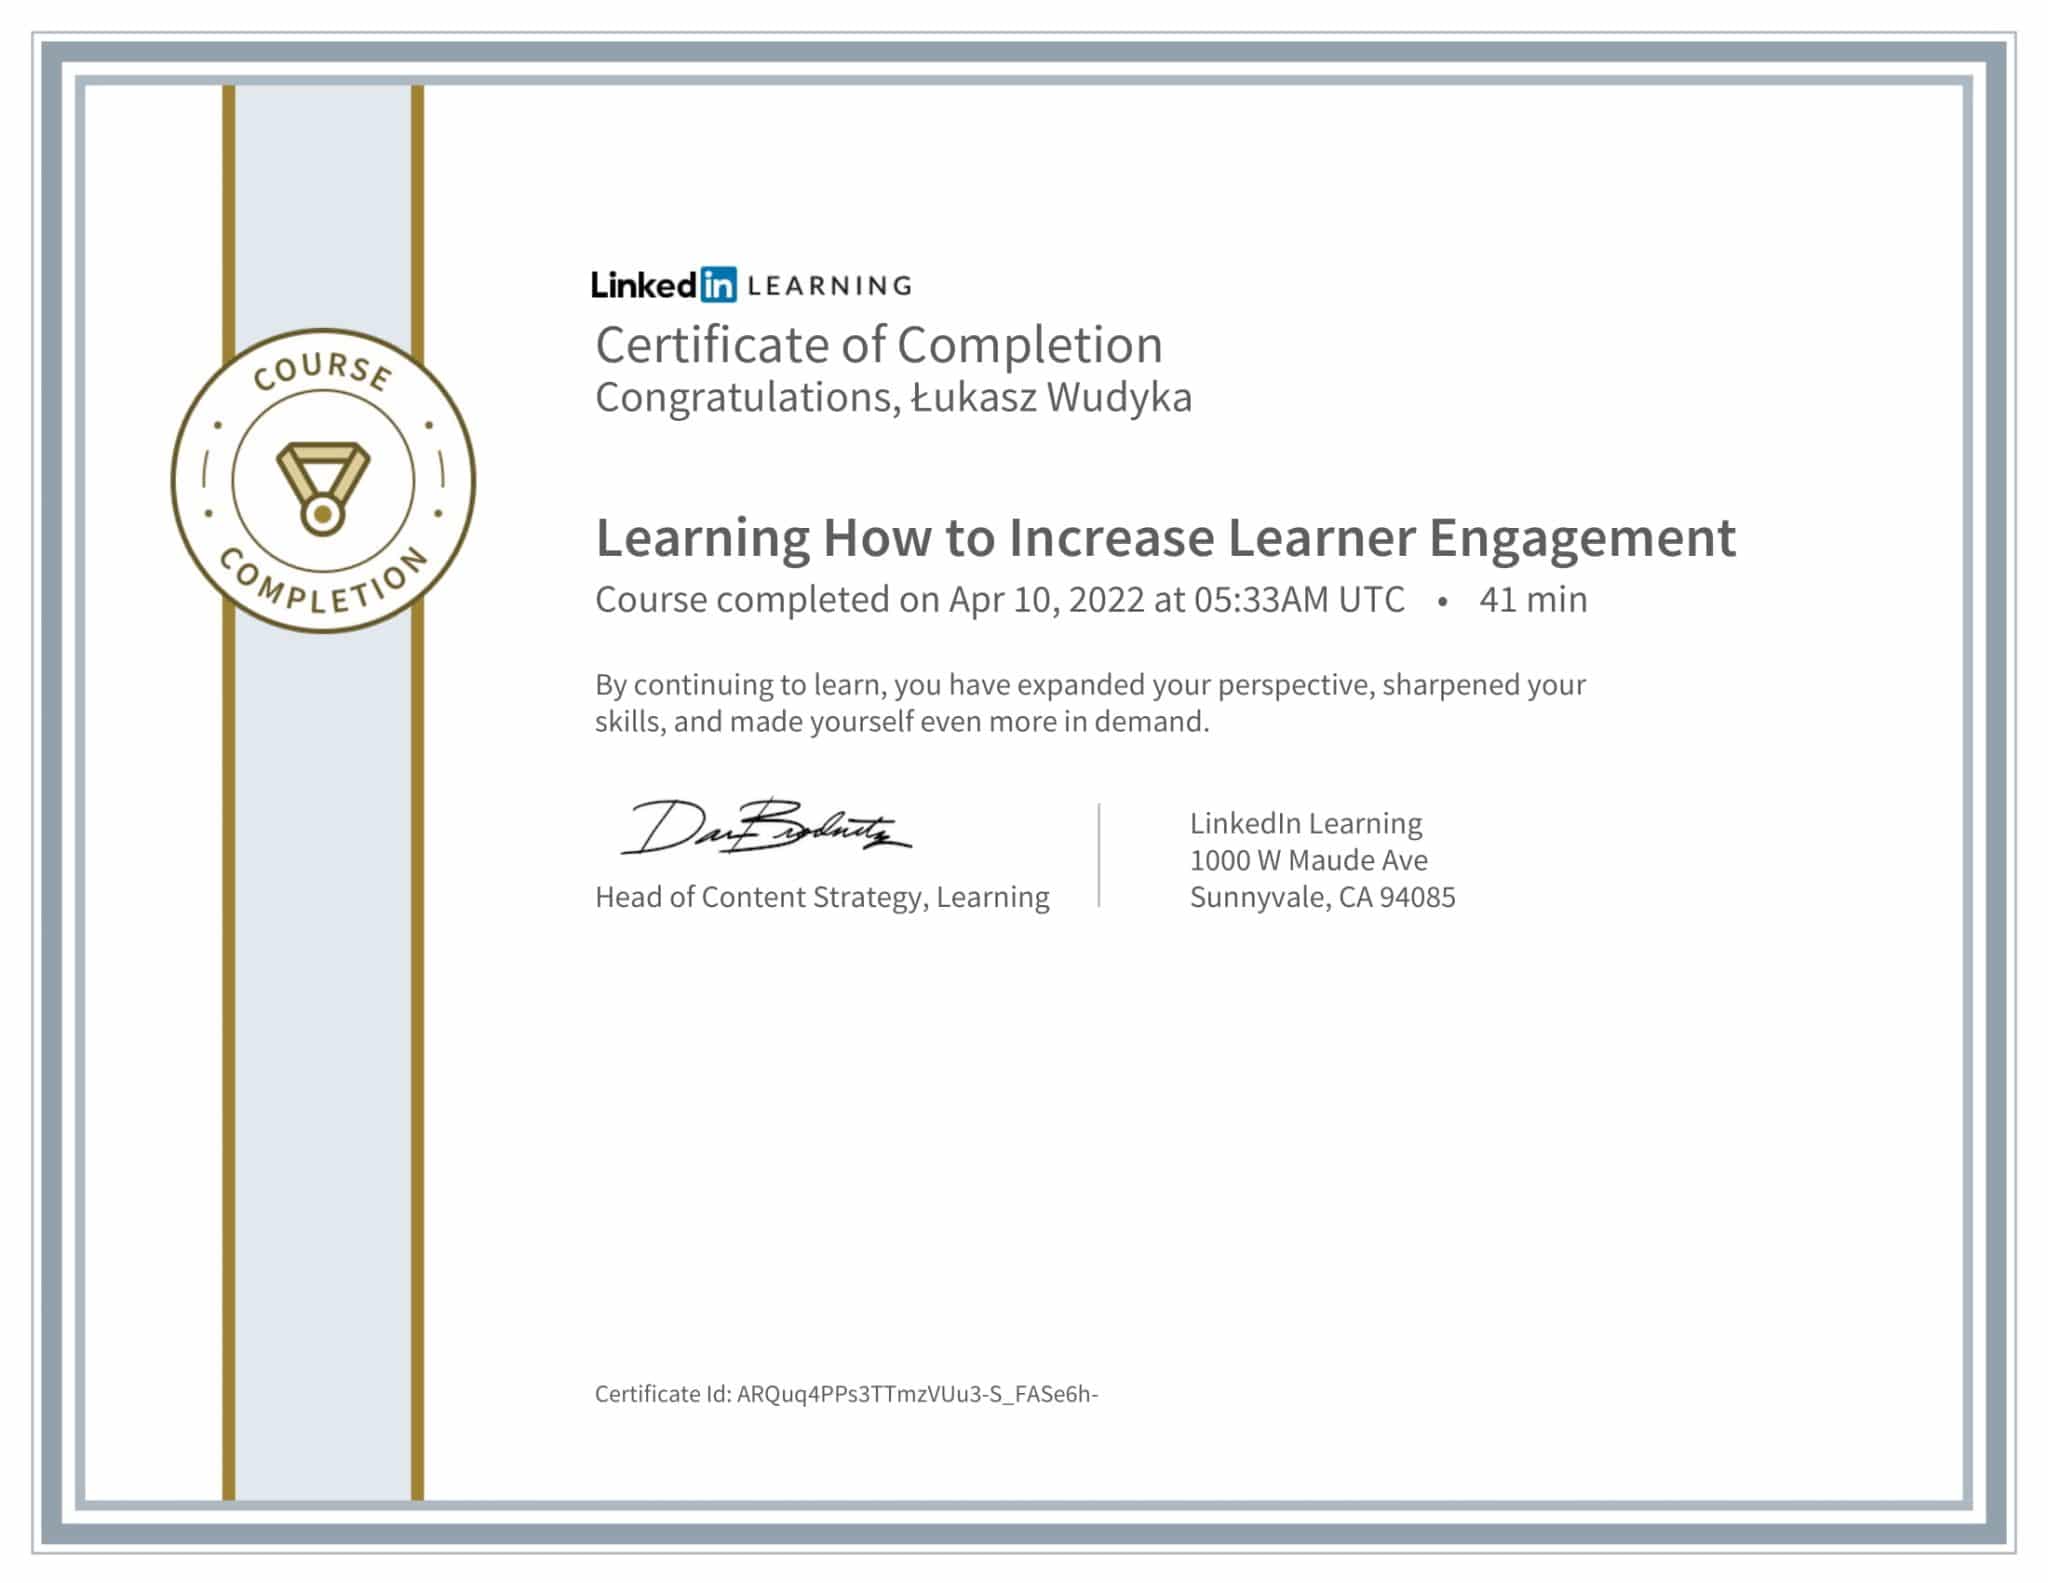 CertificateOfCompletion_Learning How to Increase Learner Engagement-1